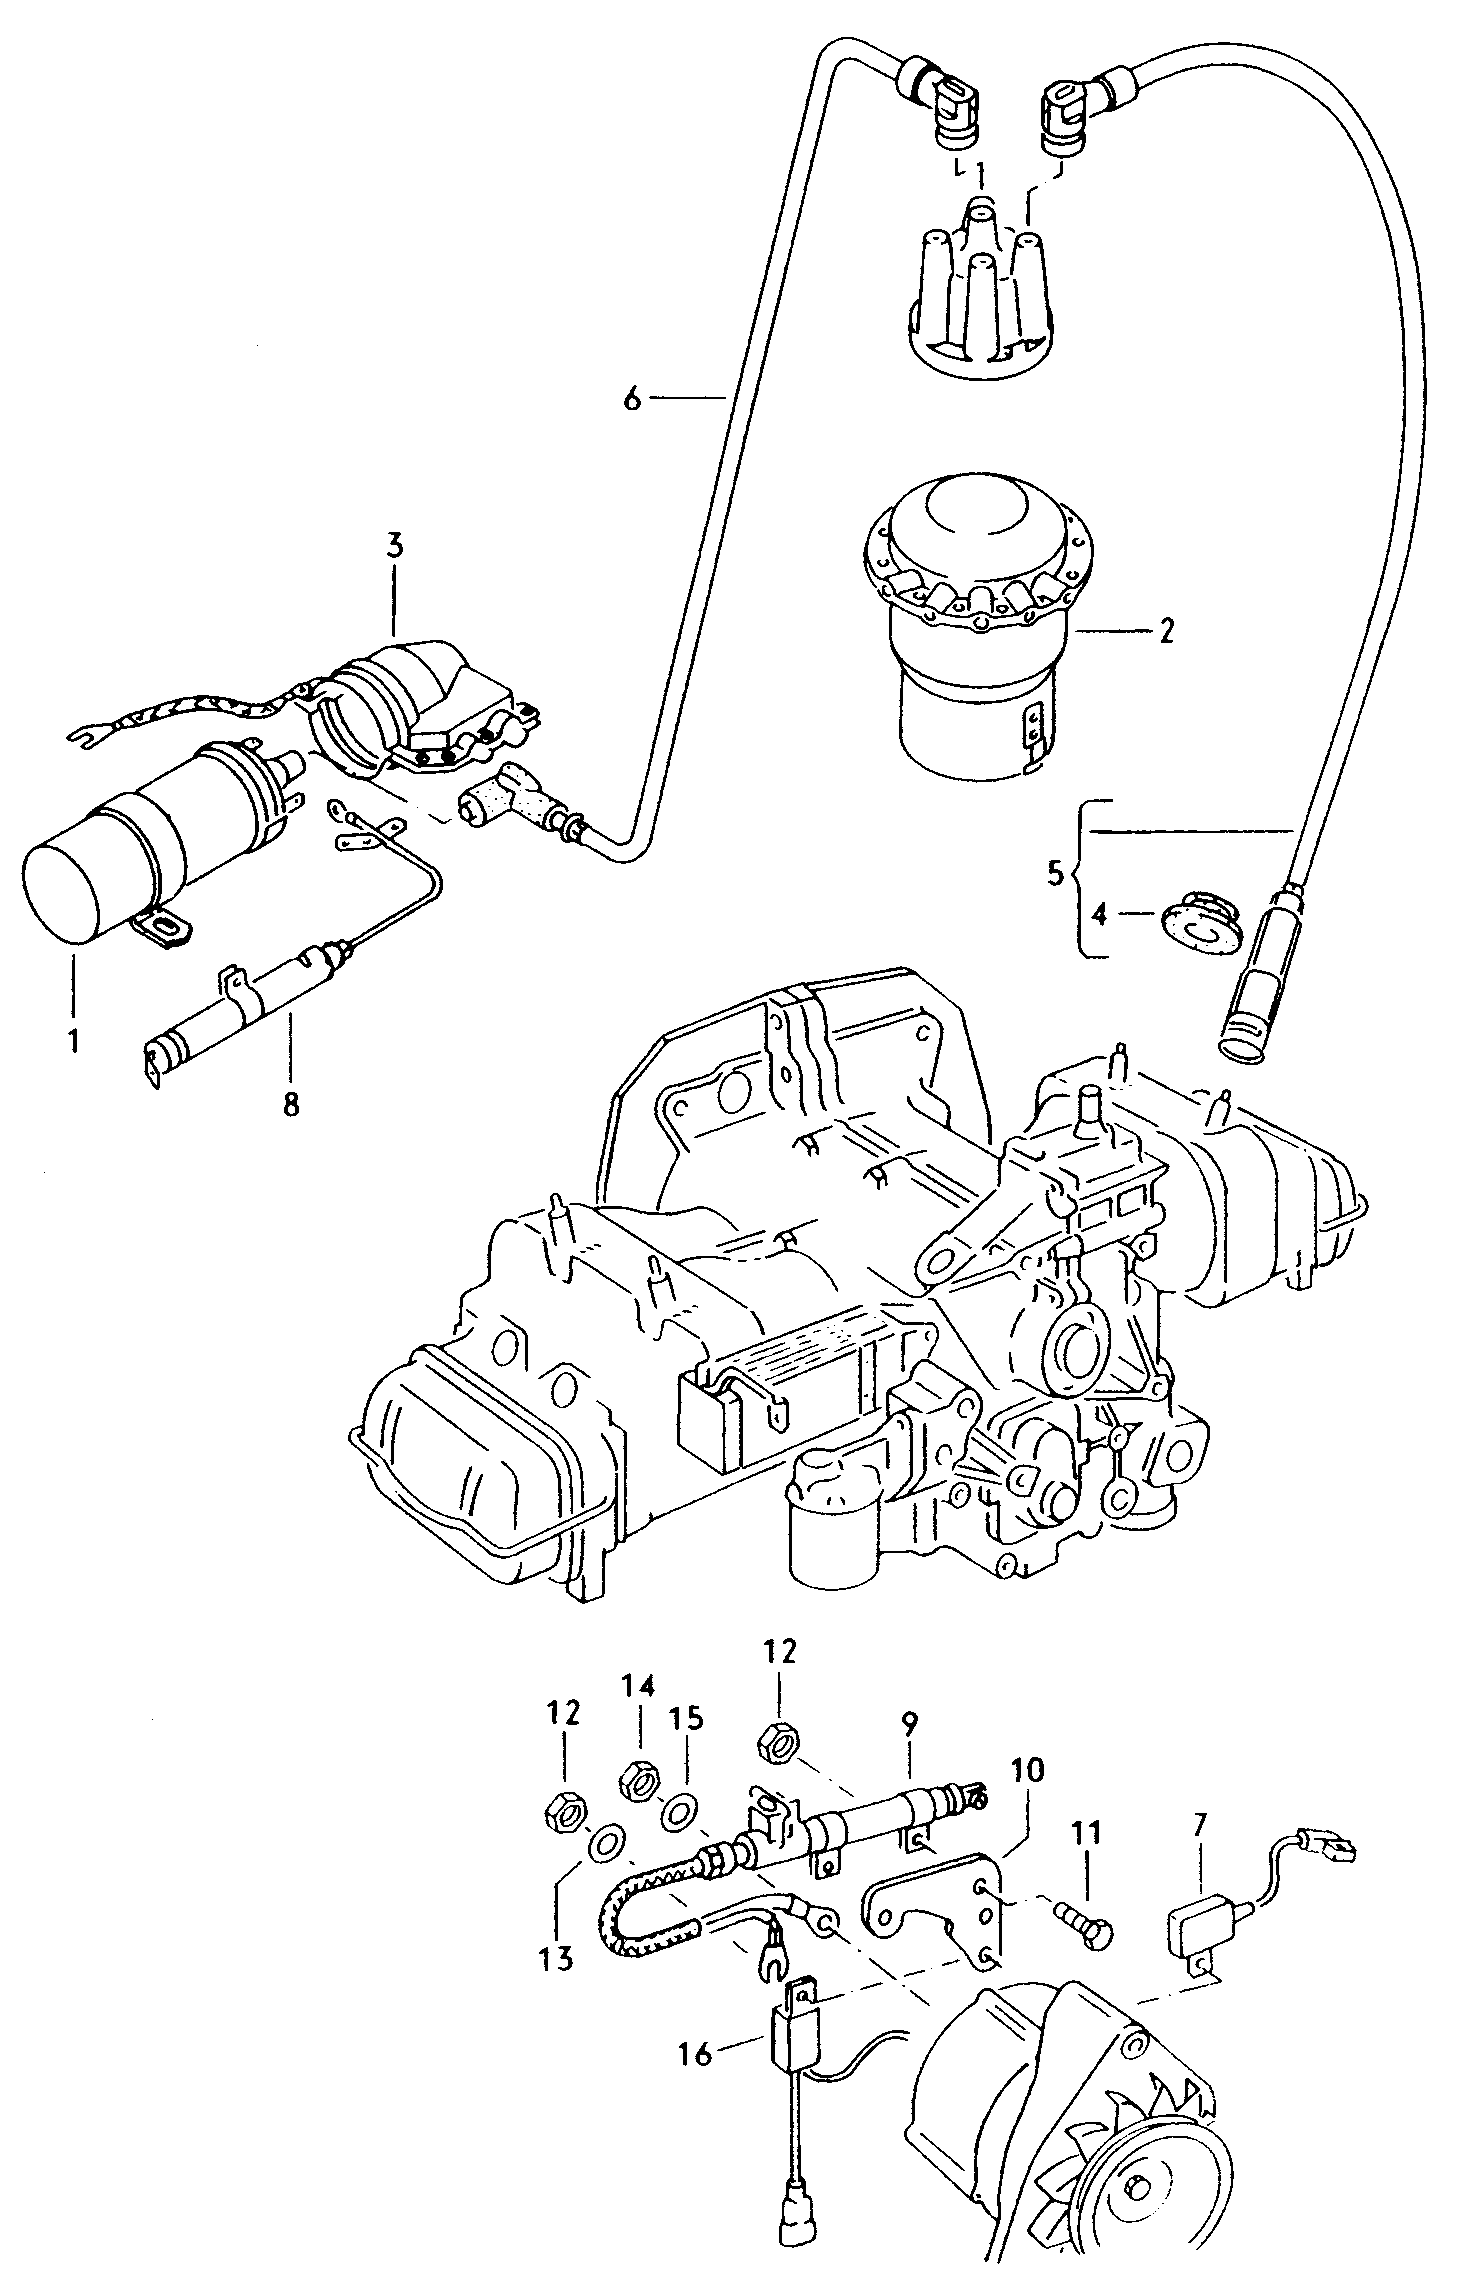 ignition system with extended
suppression - Typ 2/syncro(T2)  